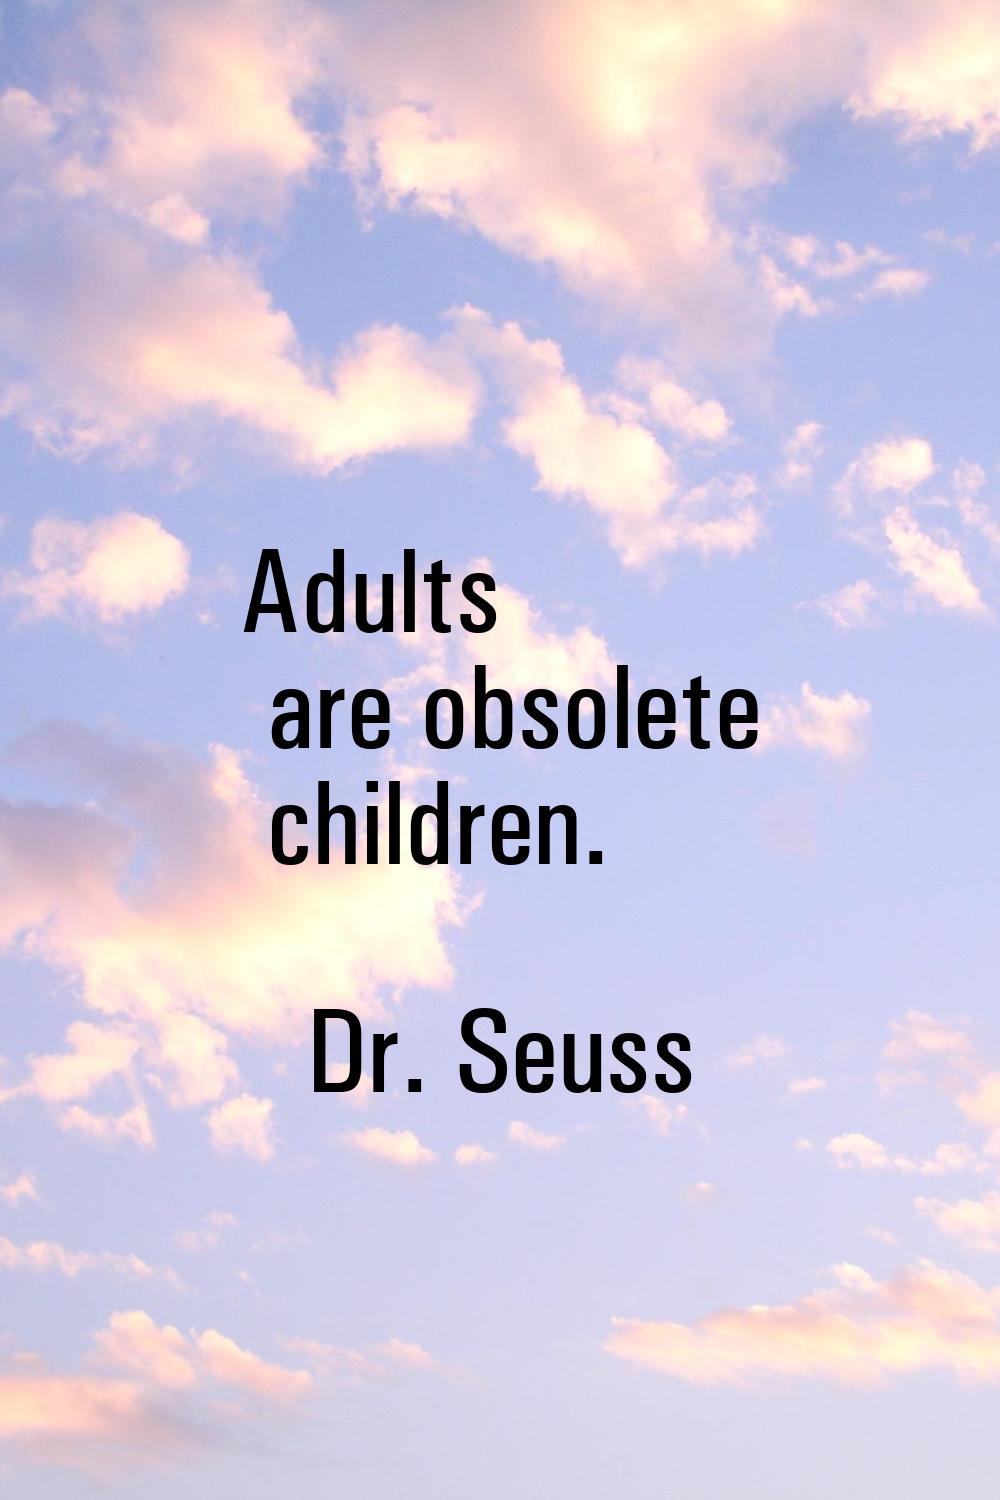 Adults are obsolete children.